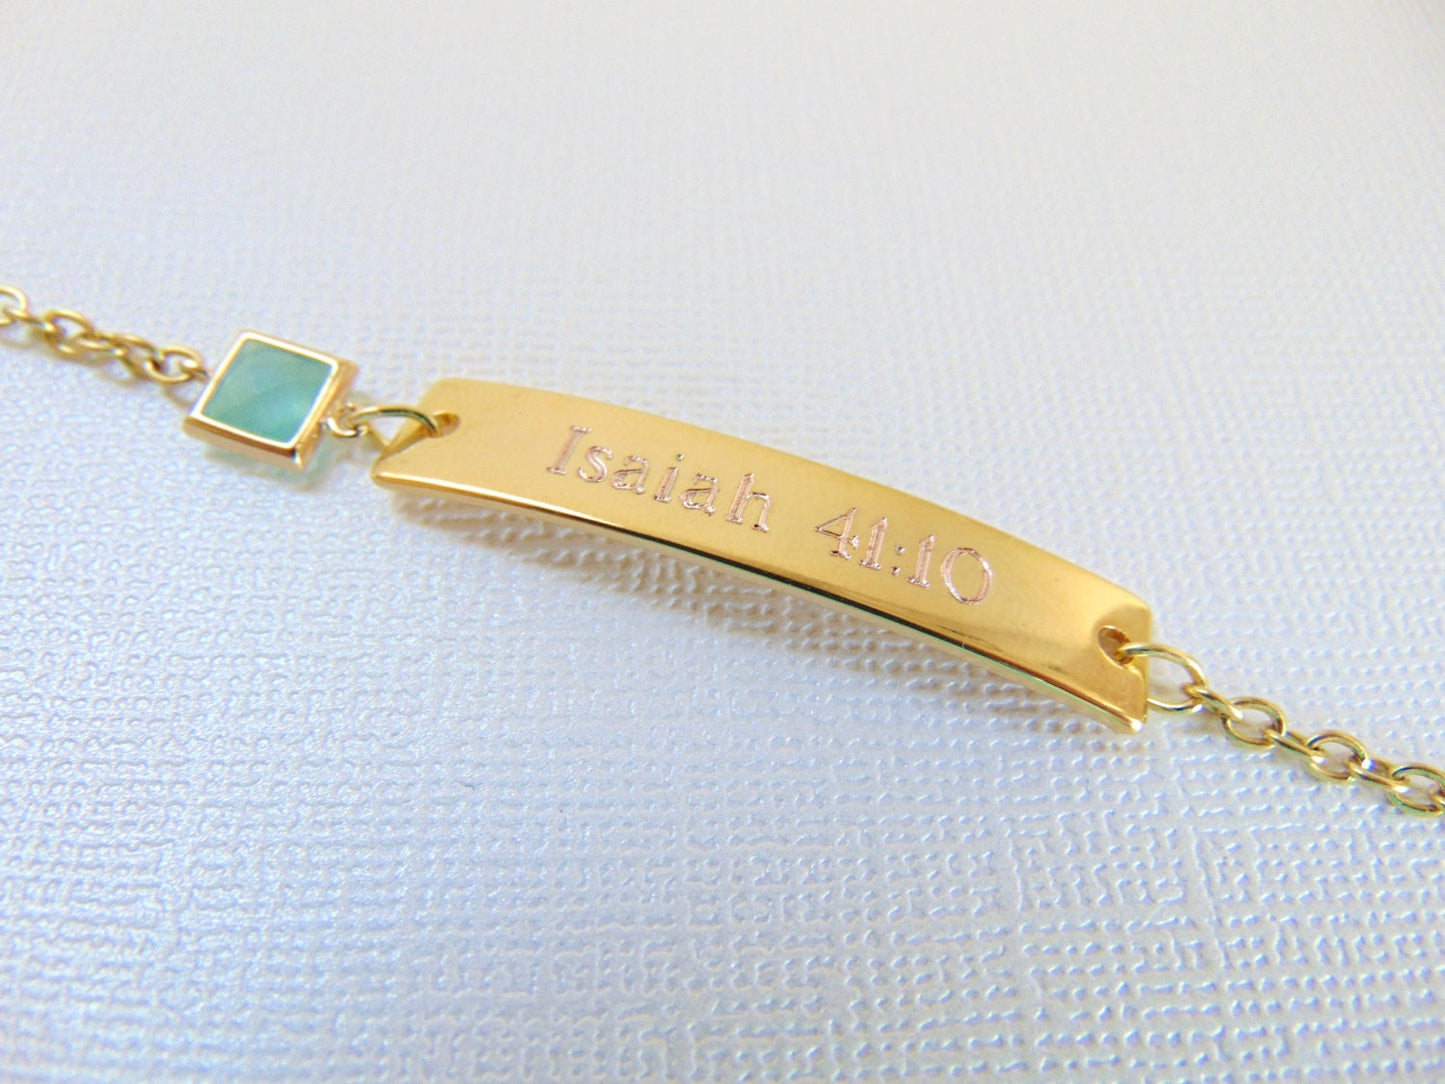 Personalized engraving on gold Bar Bracelet and mint stone